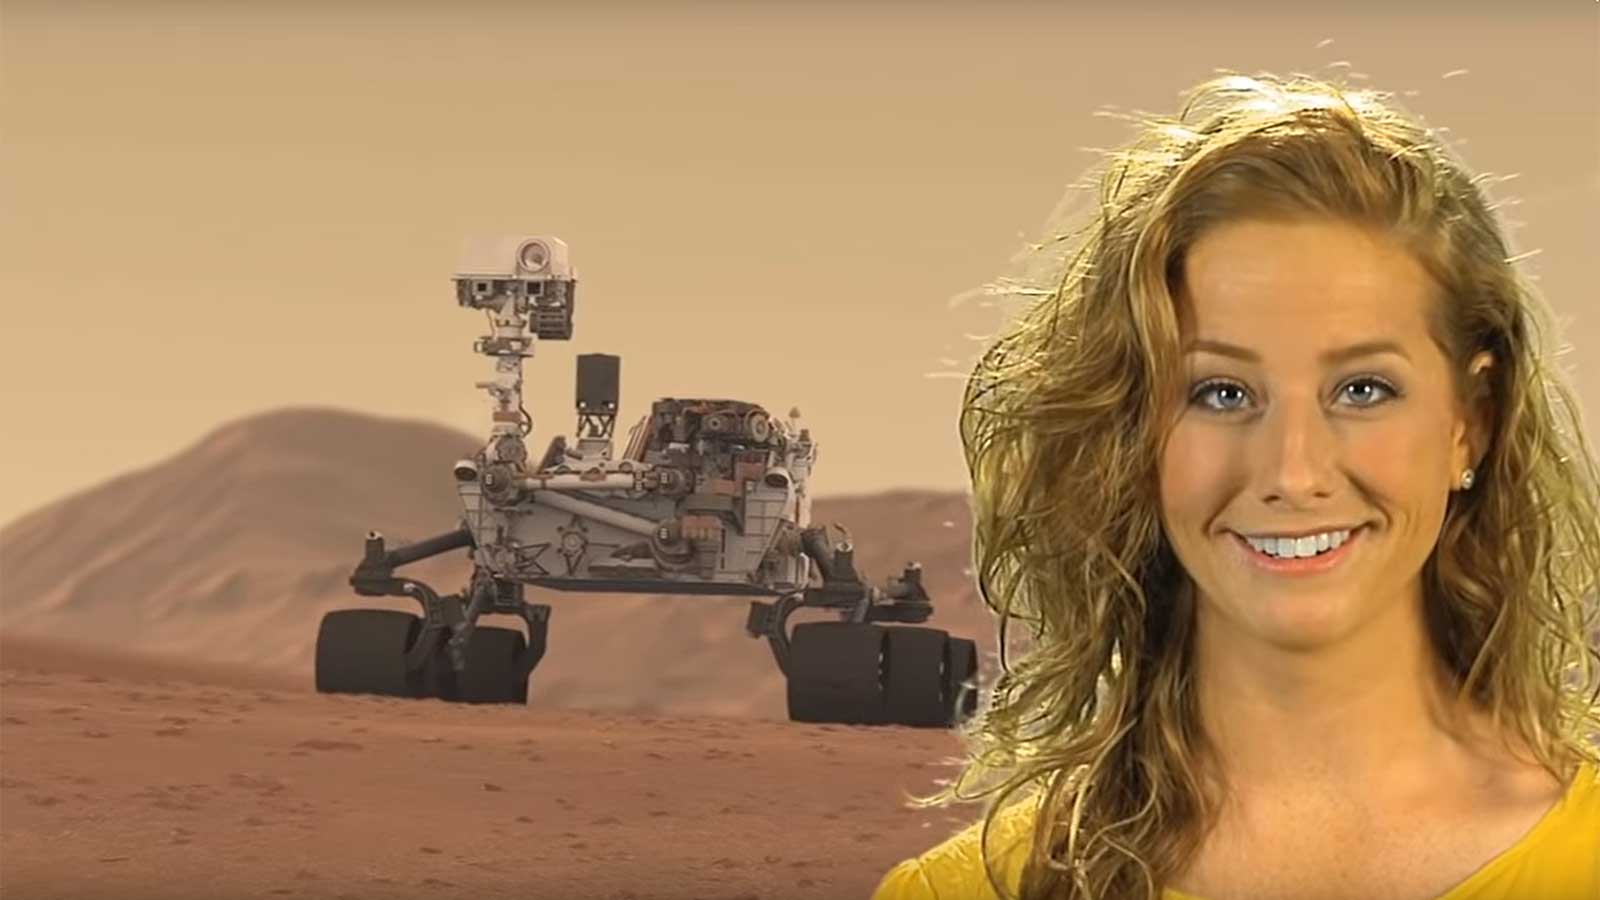 A smiling woman is superimposed on a graphic of a Mars rover.